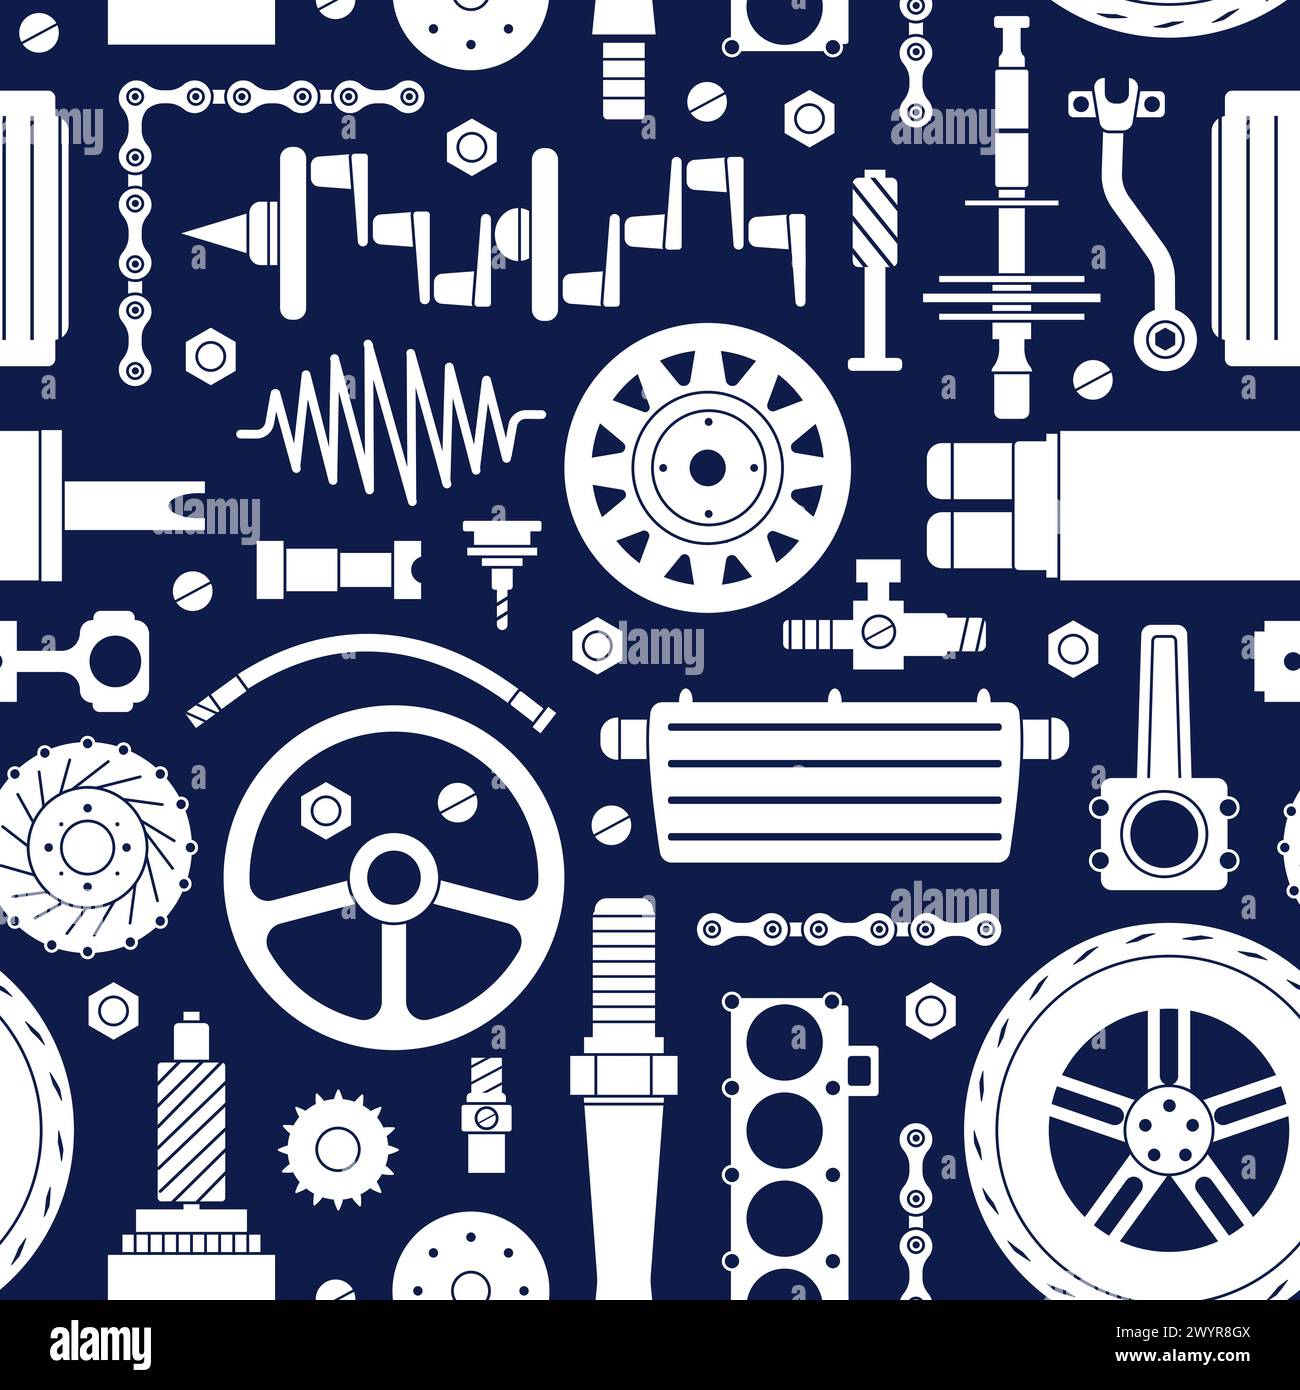 Spare parts seamless pattern. Auto service and repair background. Decorative design with gears and wheels, valve and springs, decent vector print Stock Vector